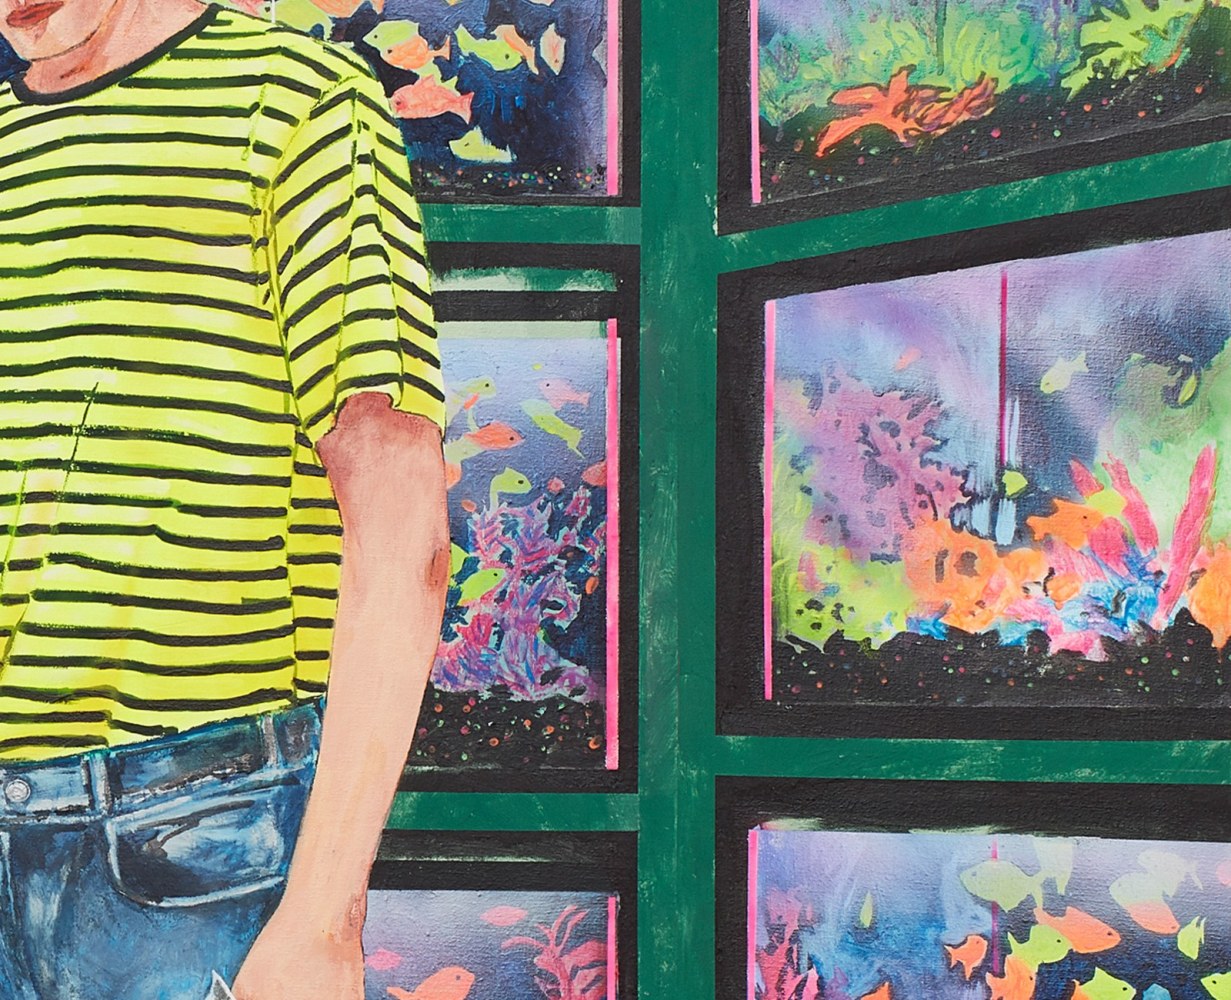 Hernan Bas,&amp;nbsp;The GloFish Enthusiast, 2019 (detail)

Acrylic on linen, 84 x 72 inches (213.3 x 182.8 cm)

Photo by Silvia Ros. Private collection